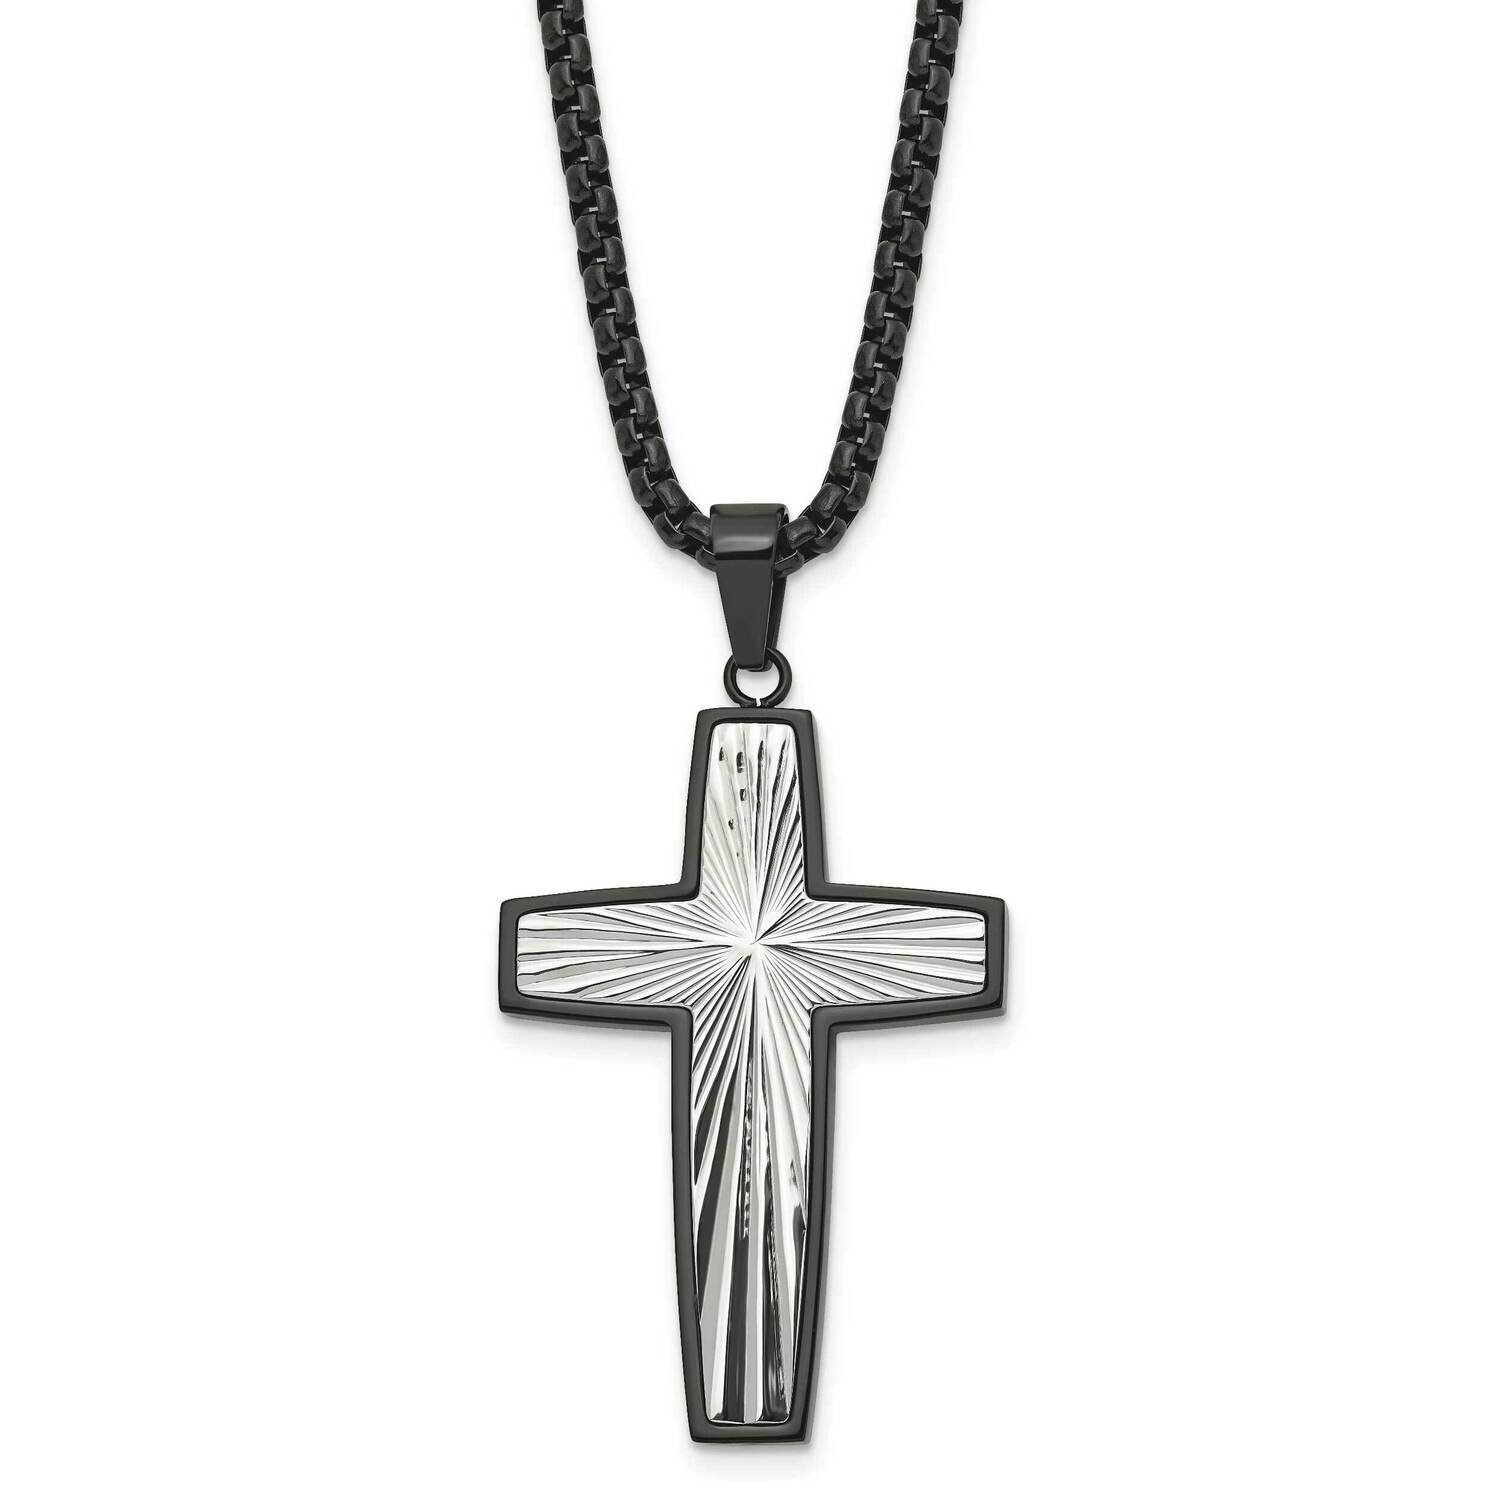 Textured Black Ip-Plated Cross 24 Inch Necklace Stainless Steel Polished SRN2972-24